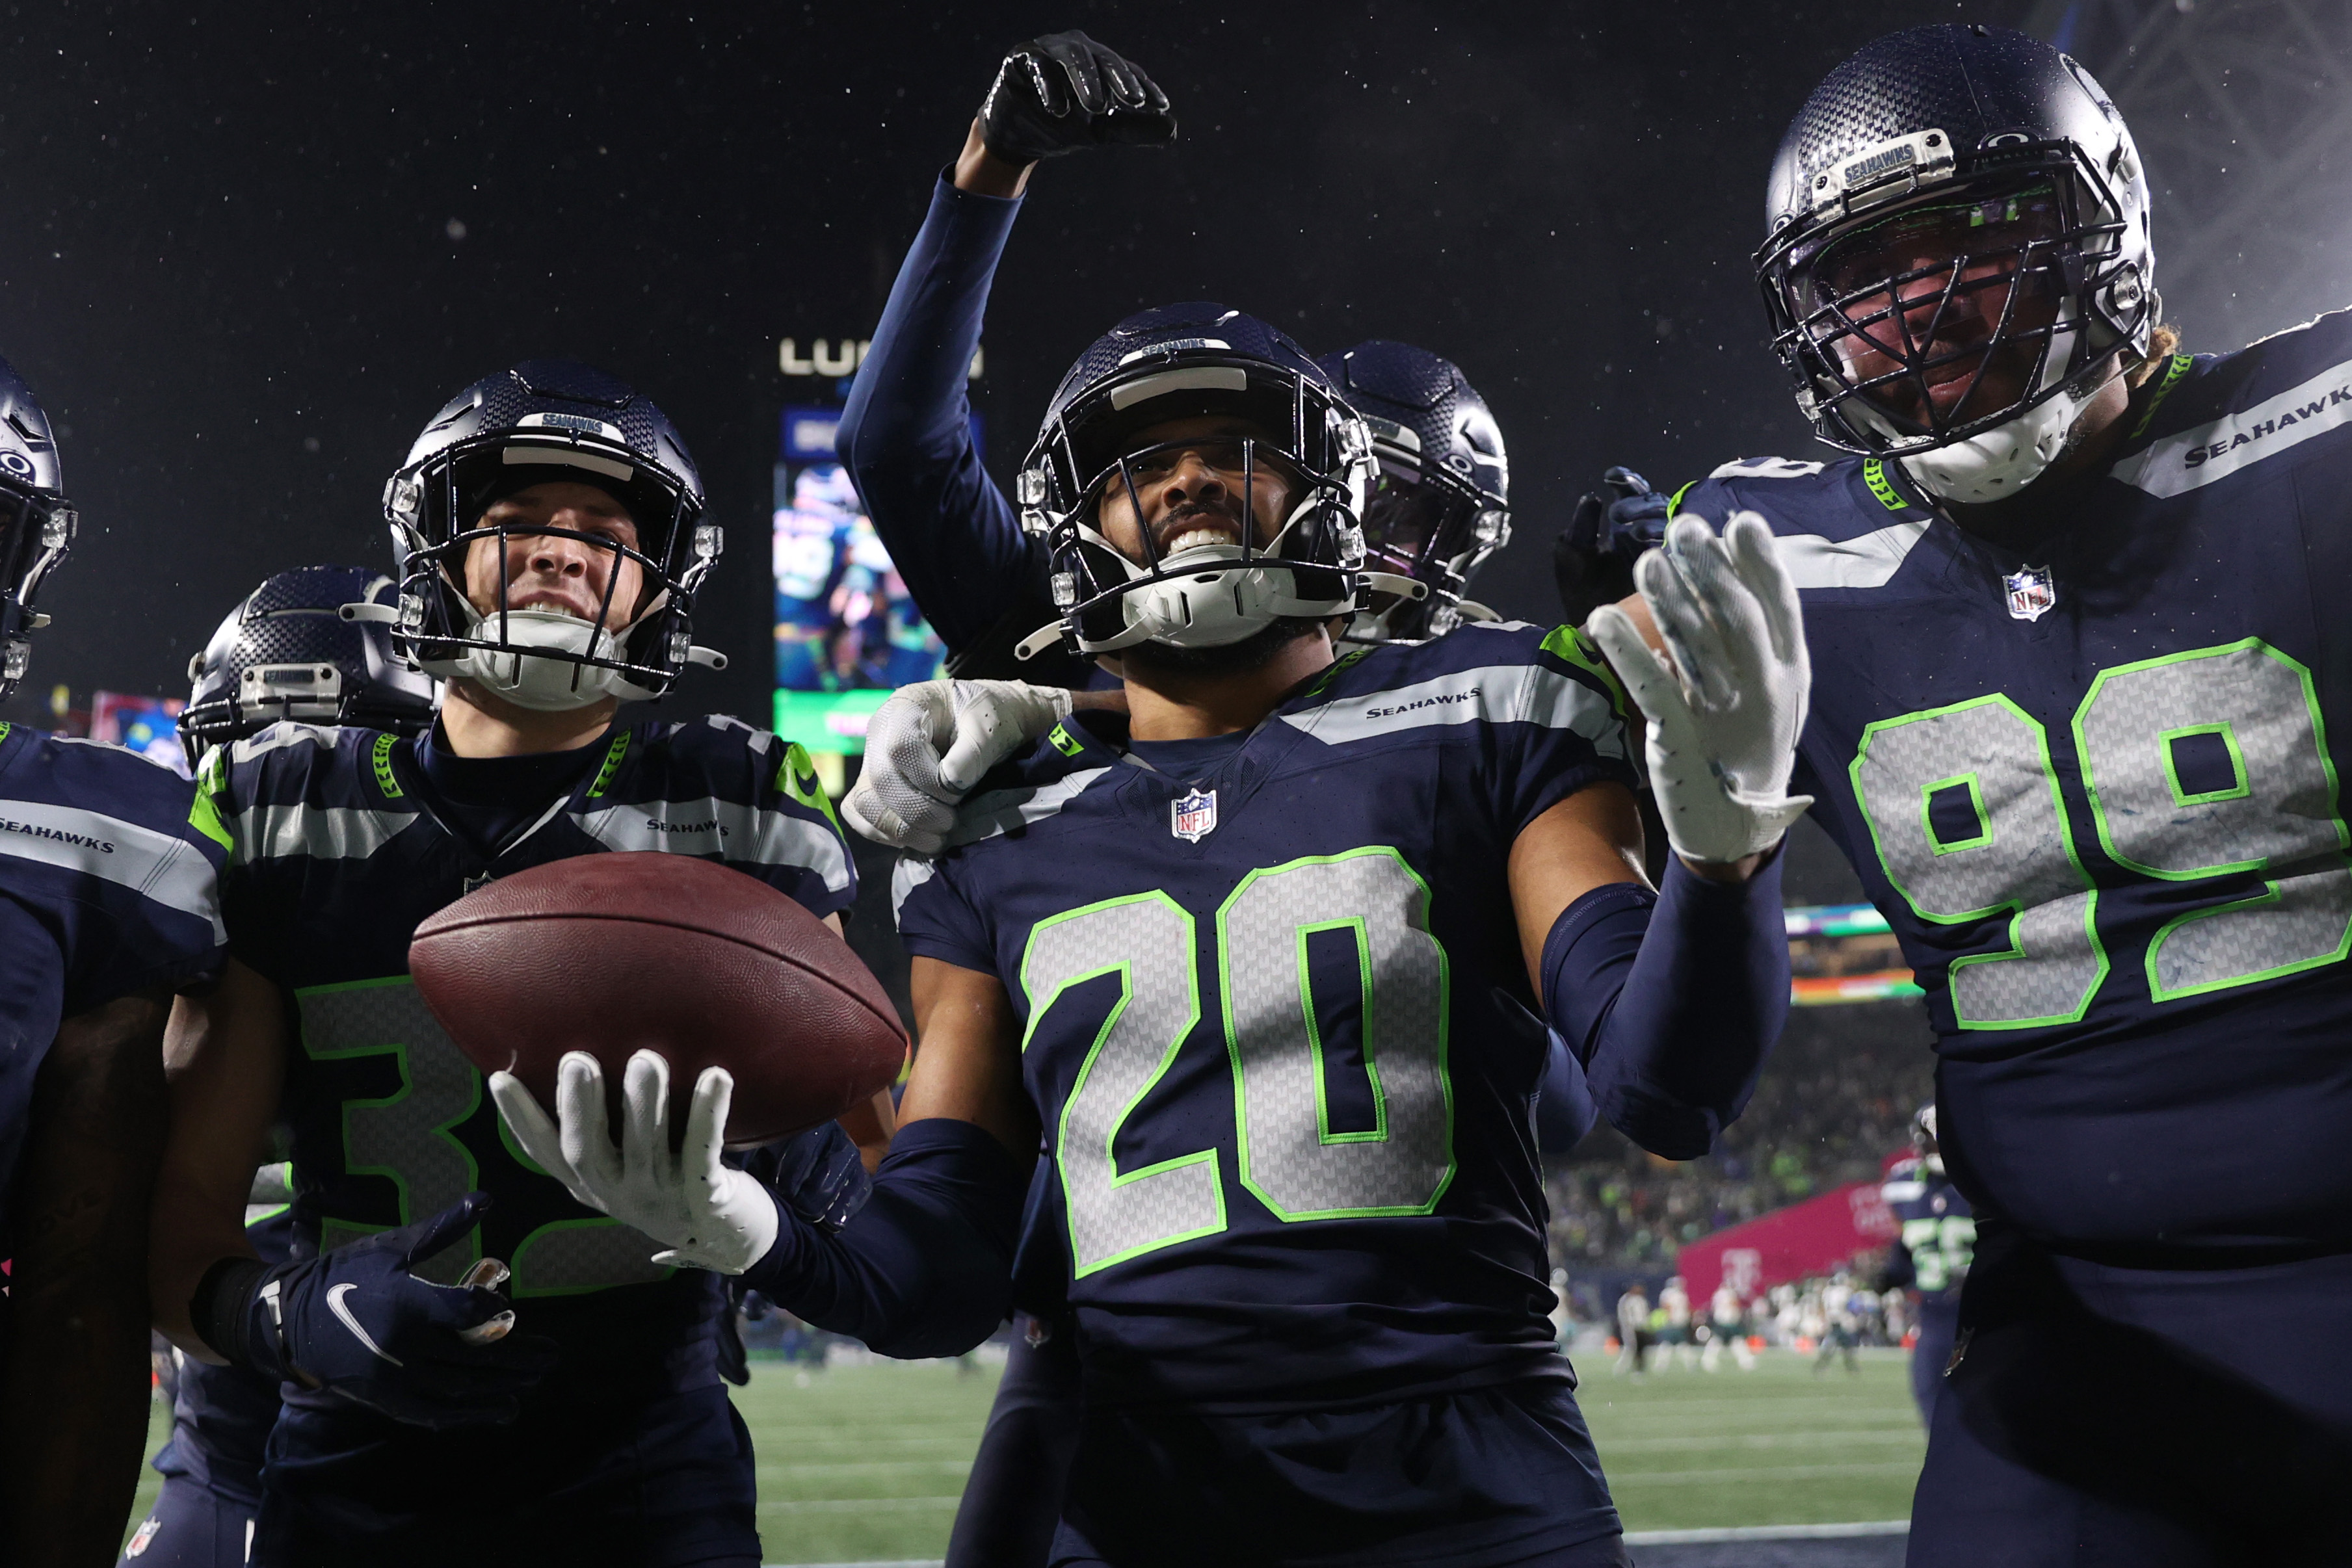 SEA 4Q 20-17 J. Hurts intercepted by J. Love to seal win for Seahawks